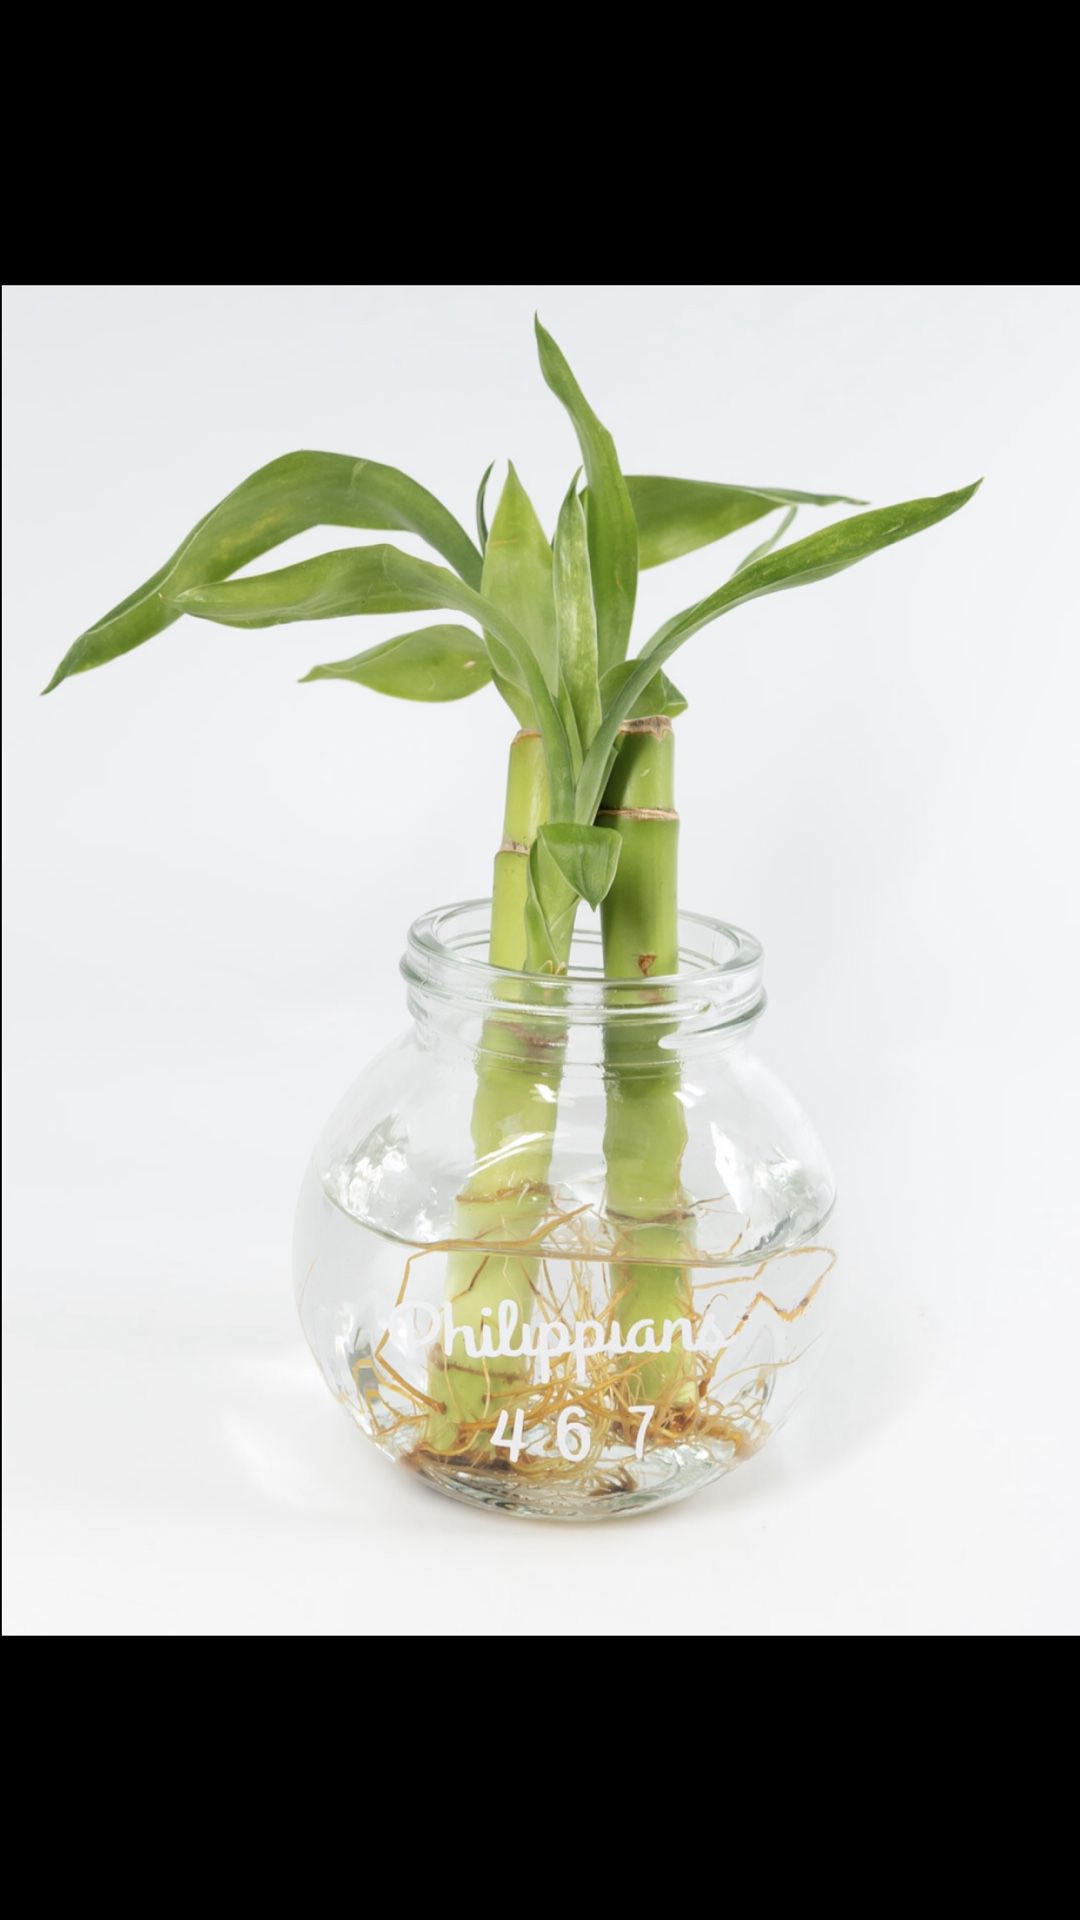 Live 2 Stalk  Bamboo Living Plant In Small Vinyled “1 John 4:8,” “Philippians 4:6-7,” Or “Pray Without Ceasing” Glass Vase For Home Decor 